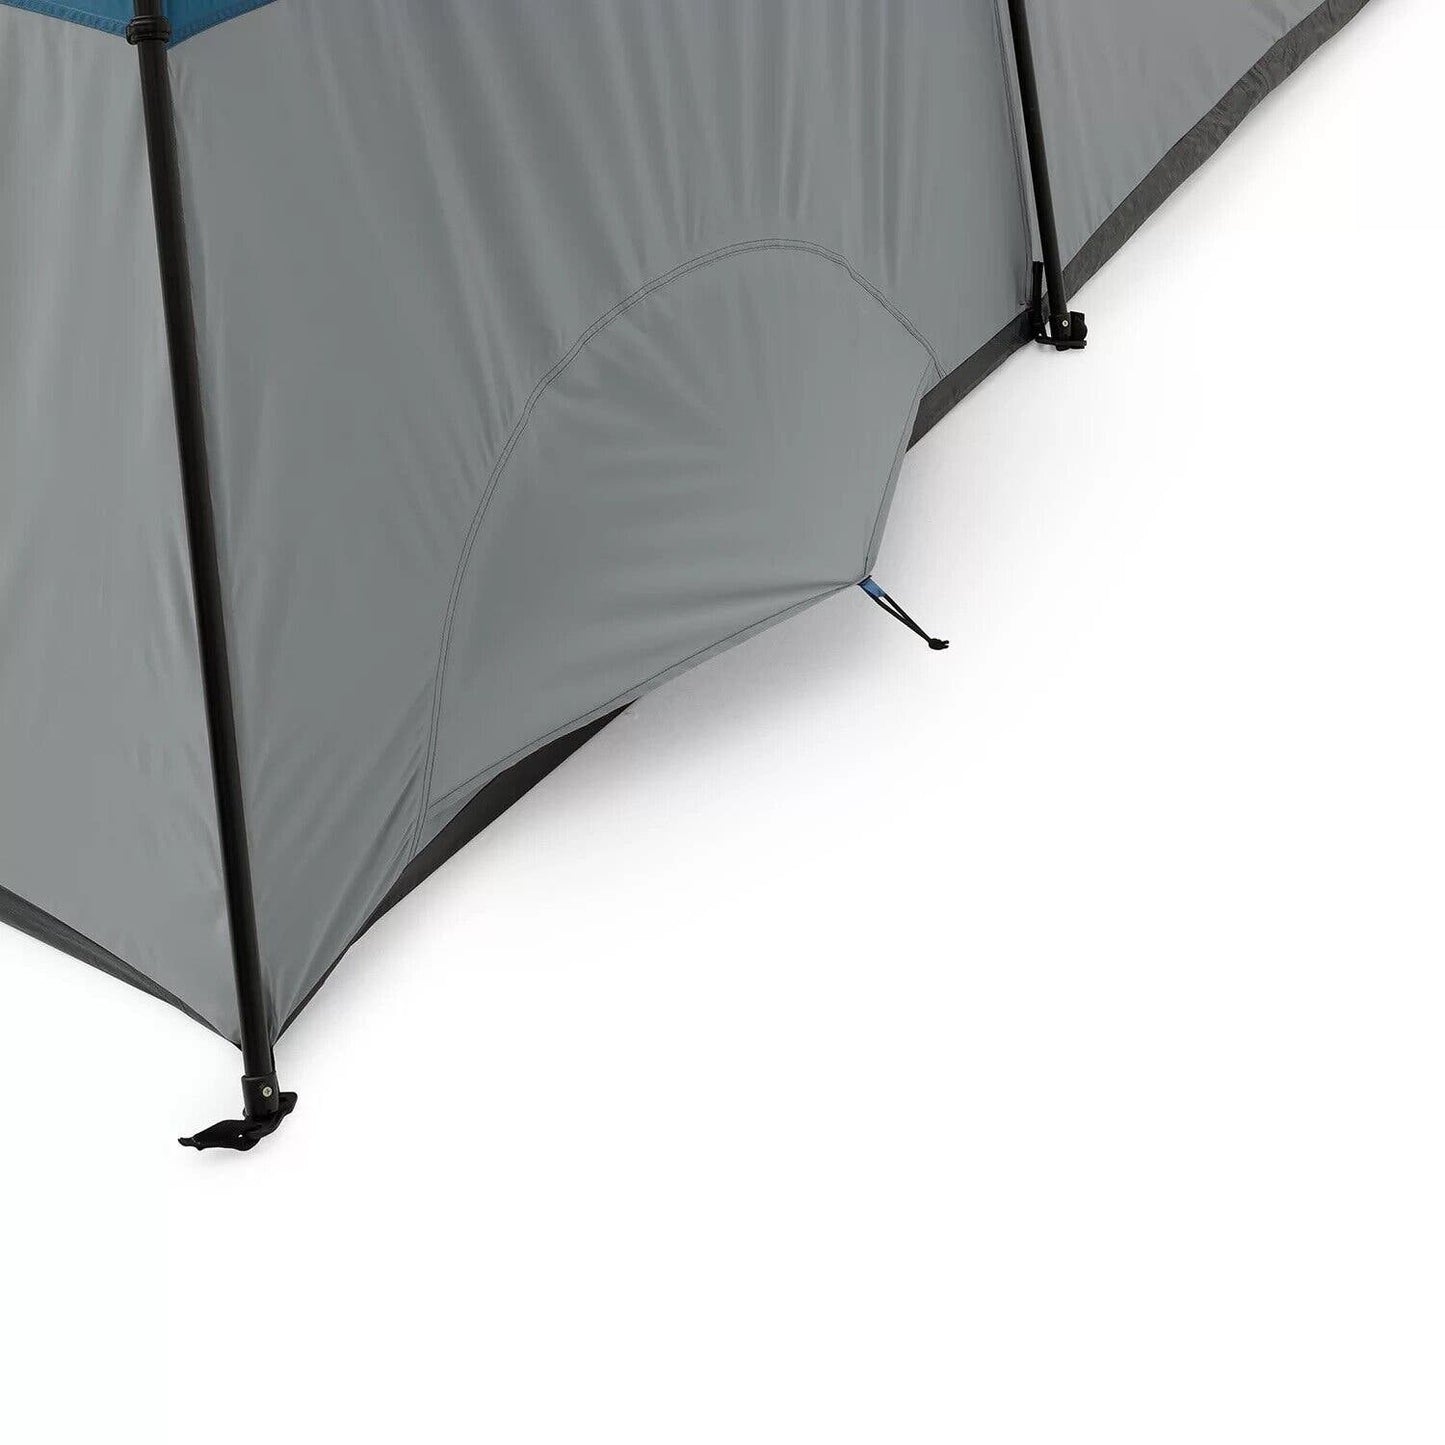 Quick Assemble 12-Person Instant-Up Cabin Tent with LED Light Hub  [Free Shipping or Local Pickup for $225]